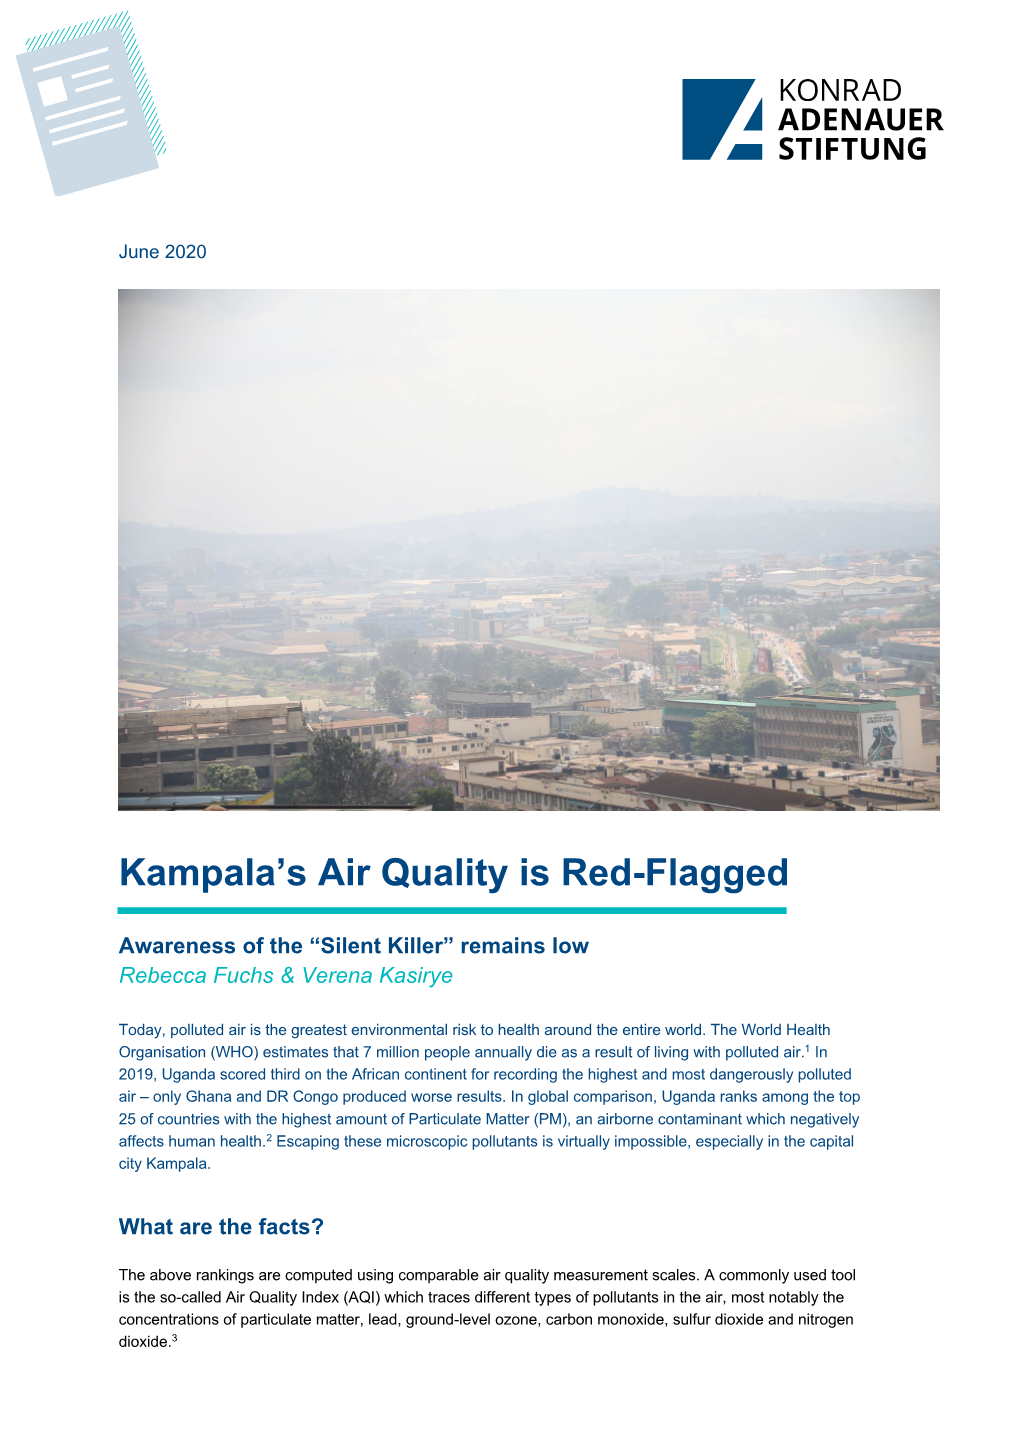 Kampala's Air Quality Is Red-Flagged